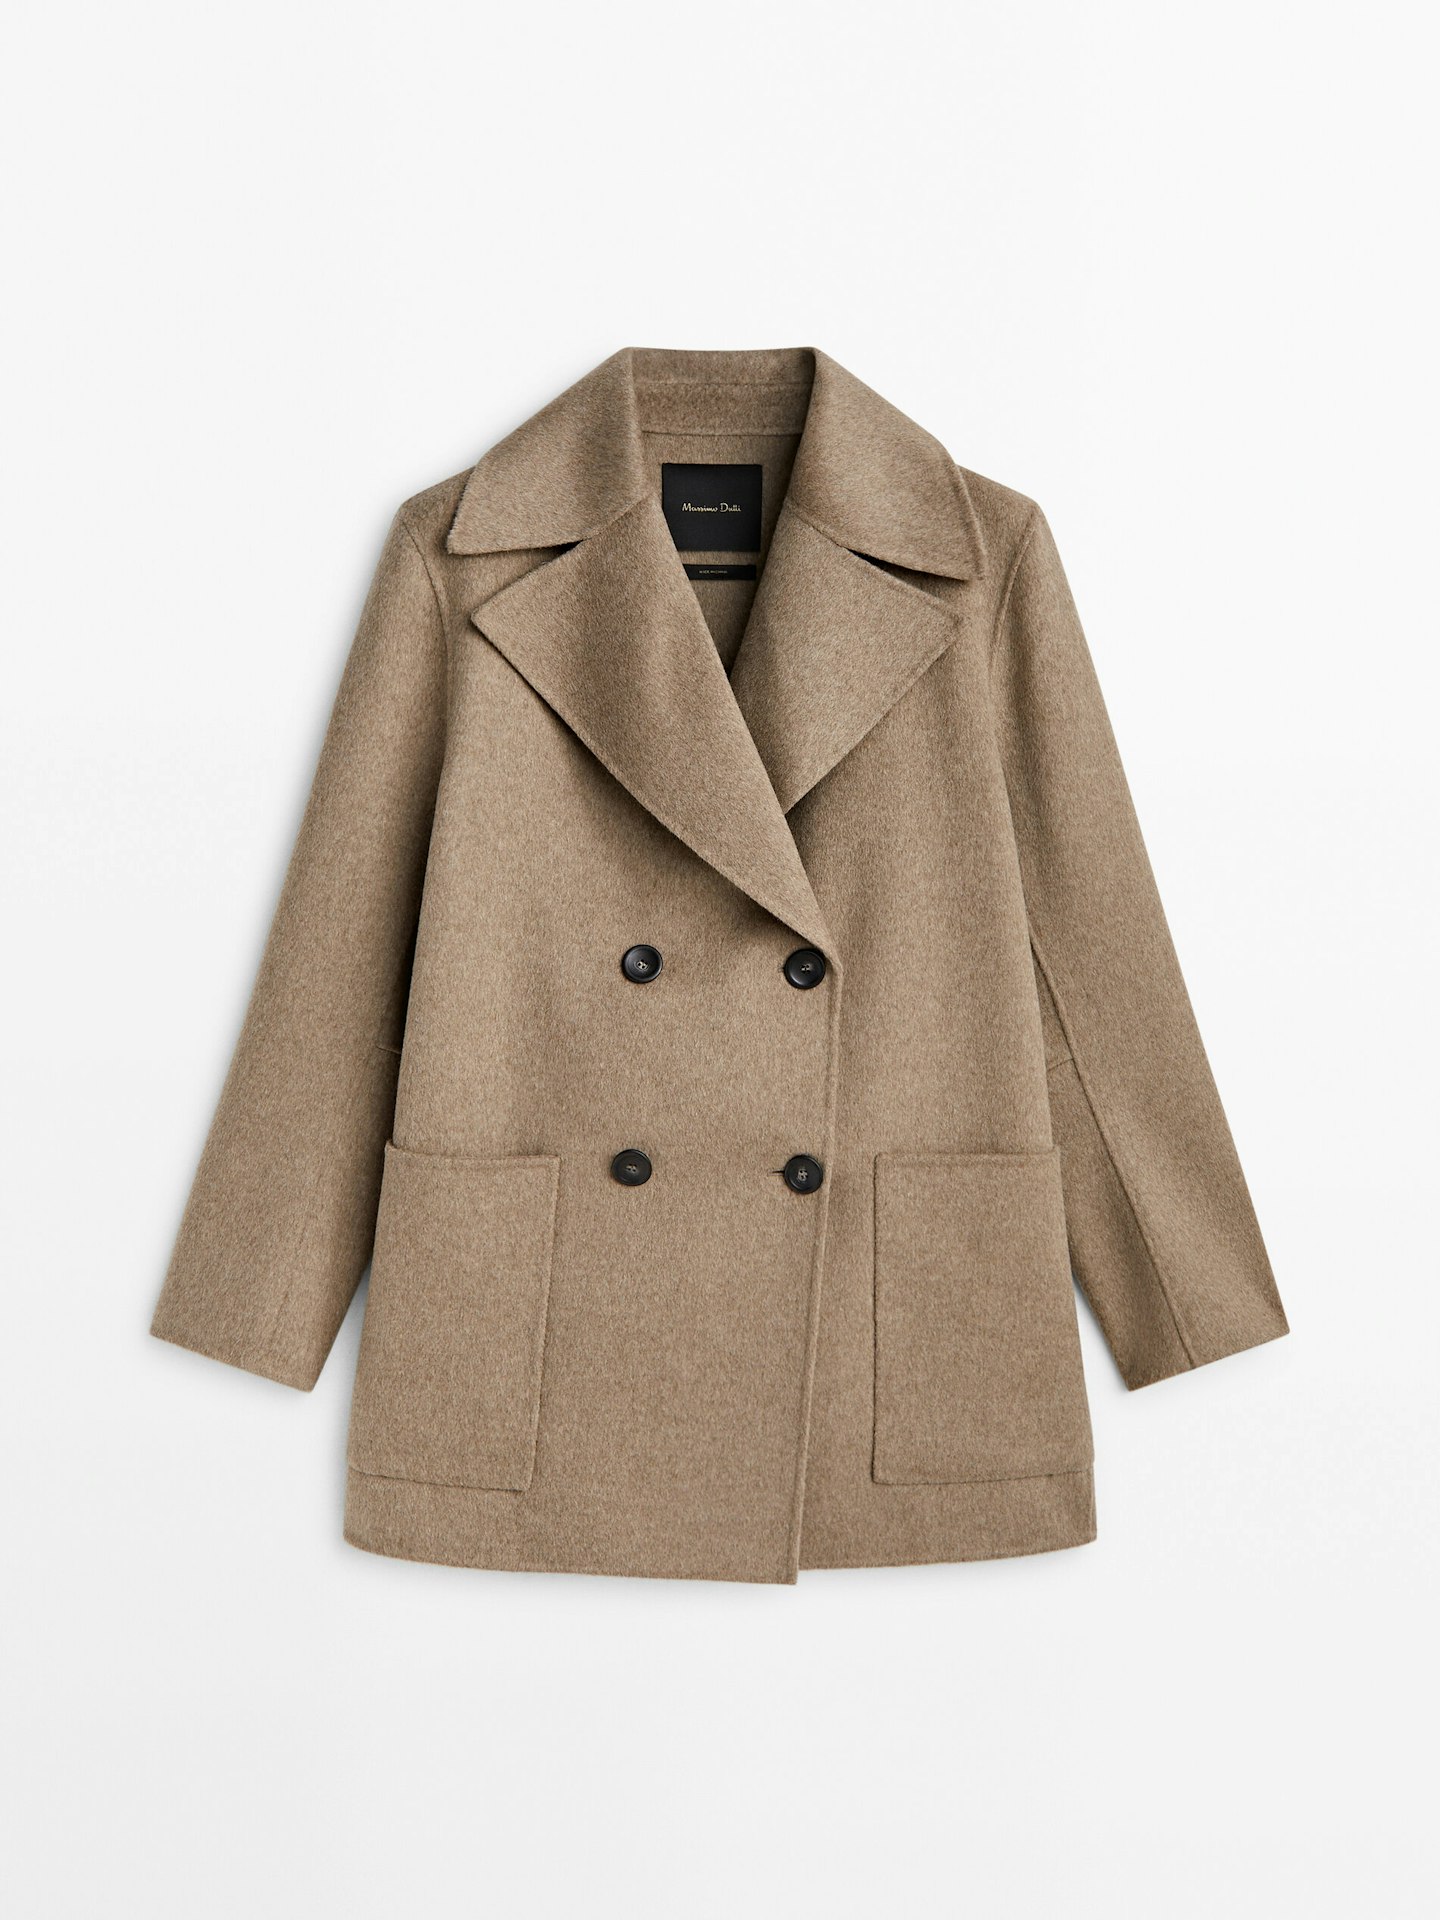 Massimo Dutti, Short Wool-Blend Coat With Pockets